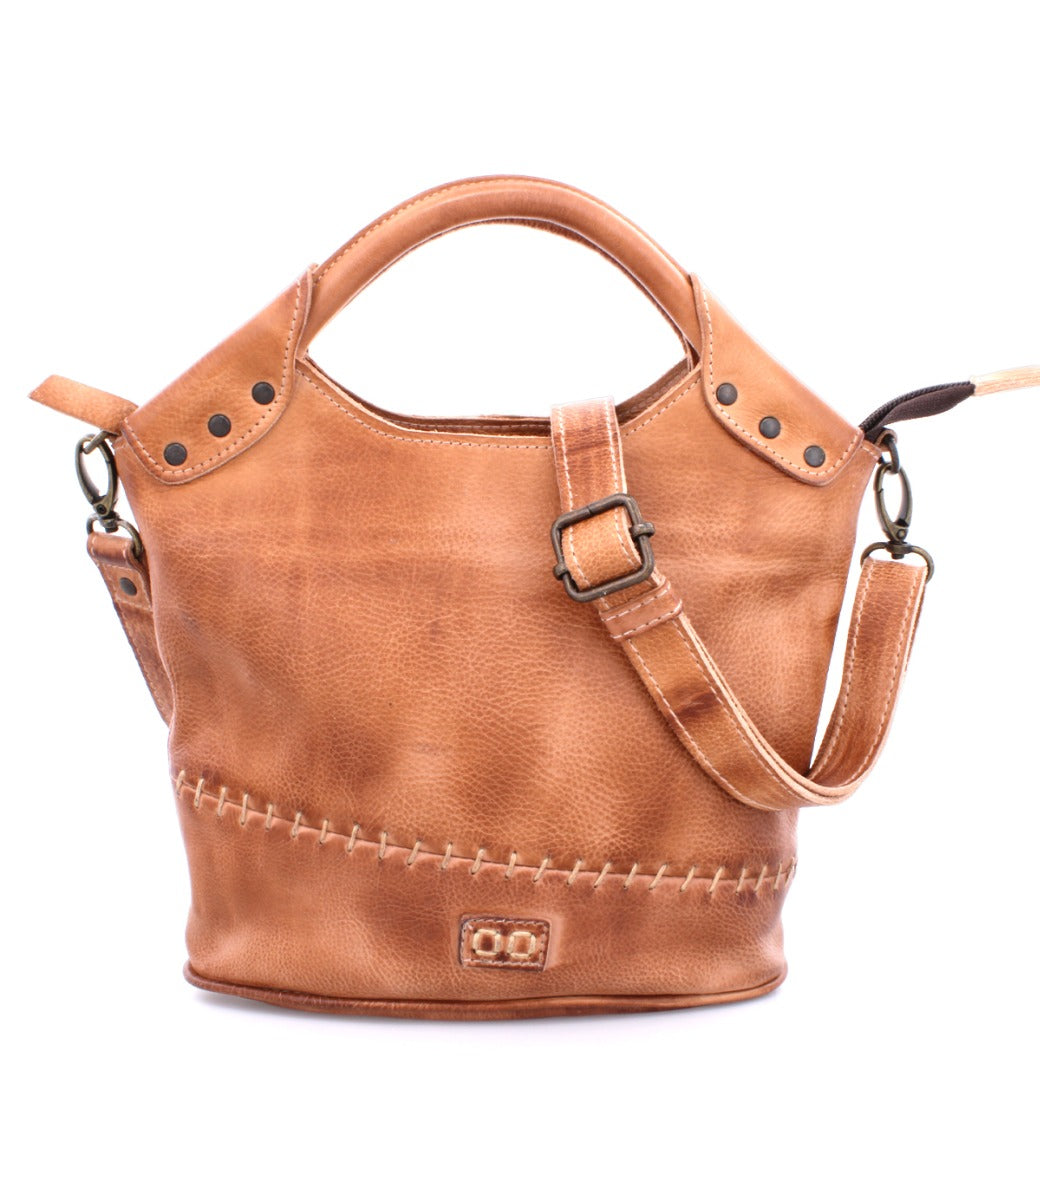 A Delilah bag by Bed Stu, made of tan leather with a strap and handle.